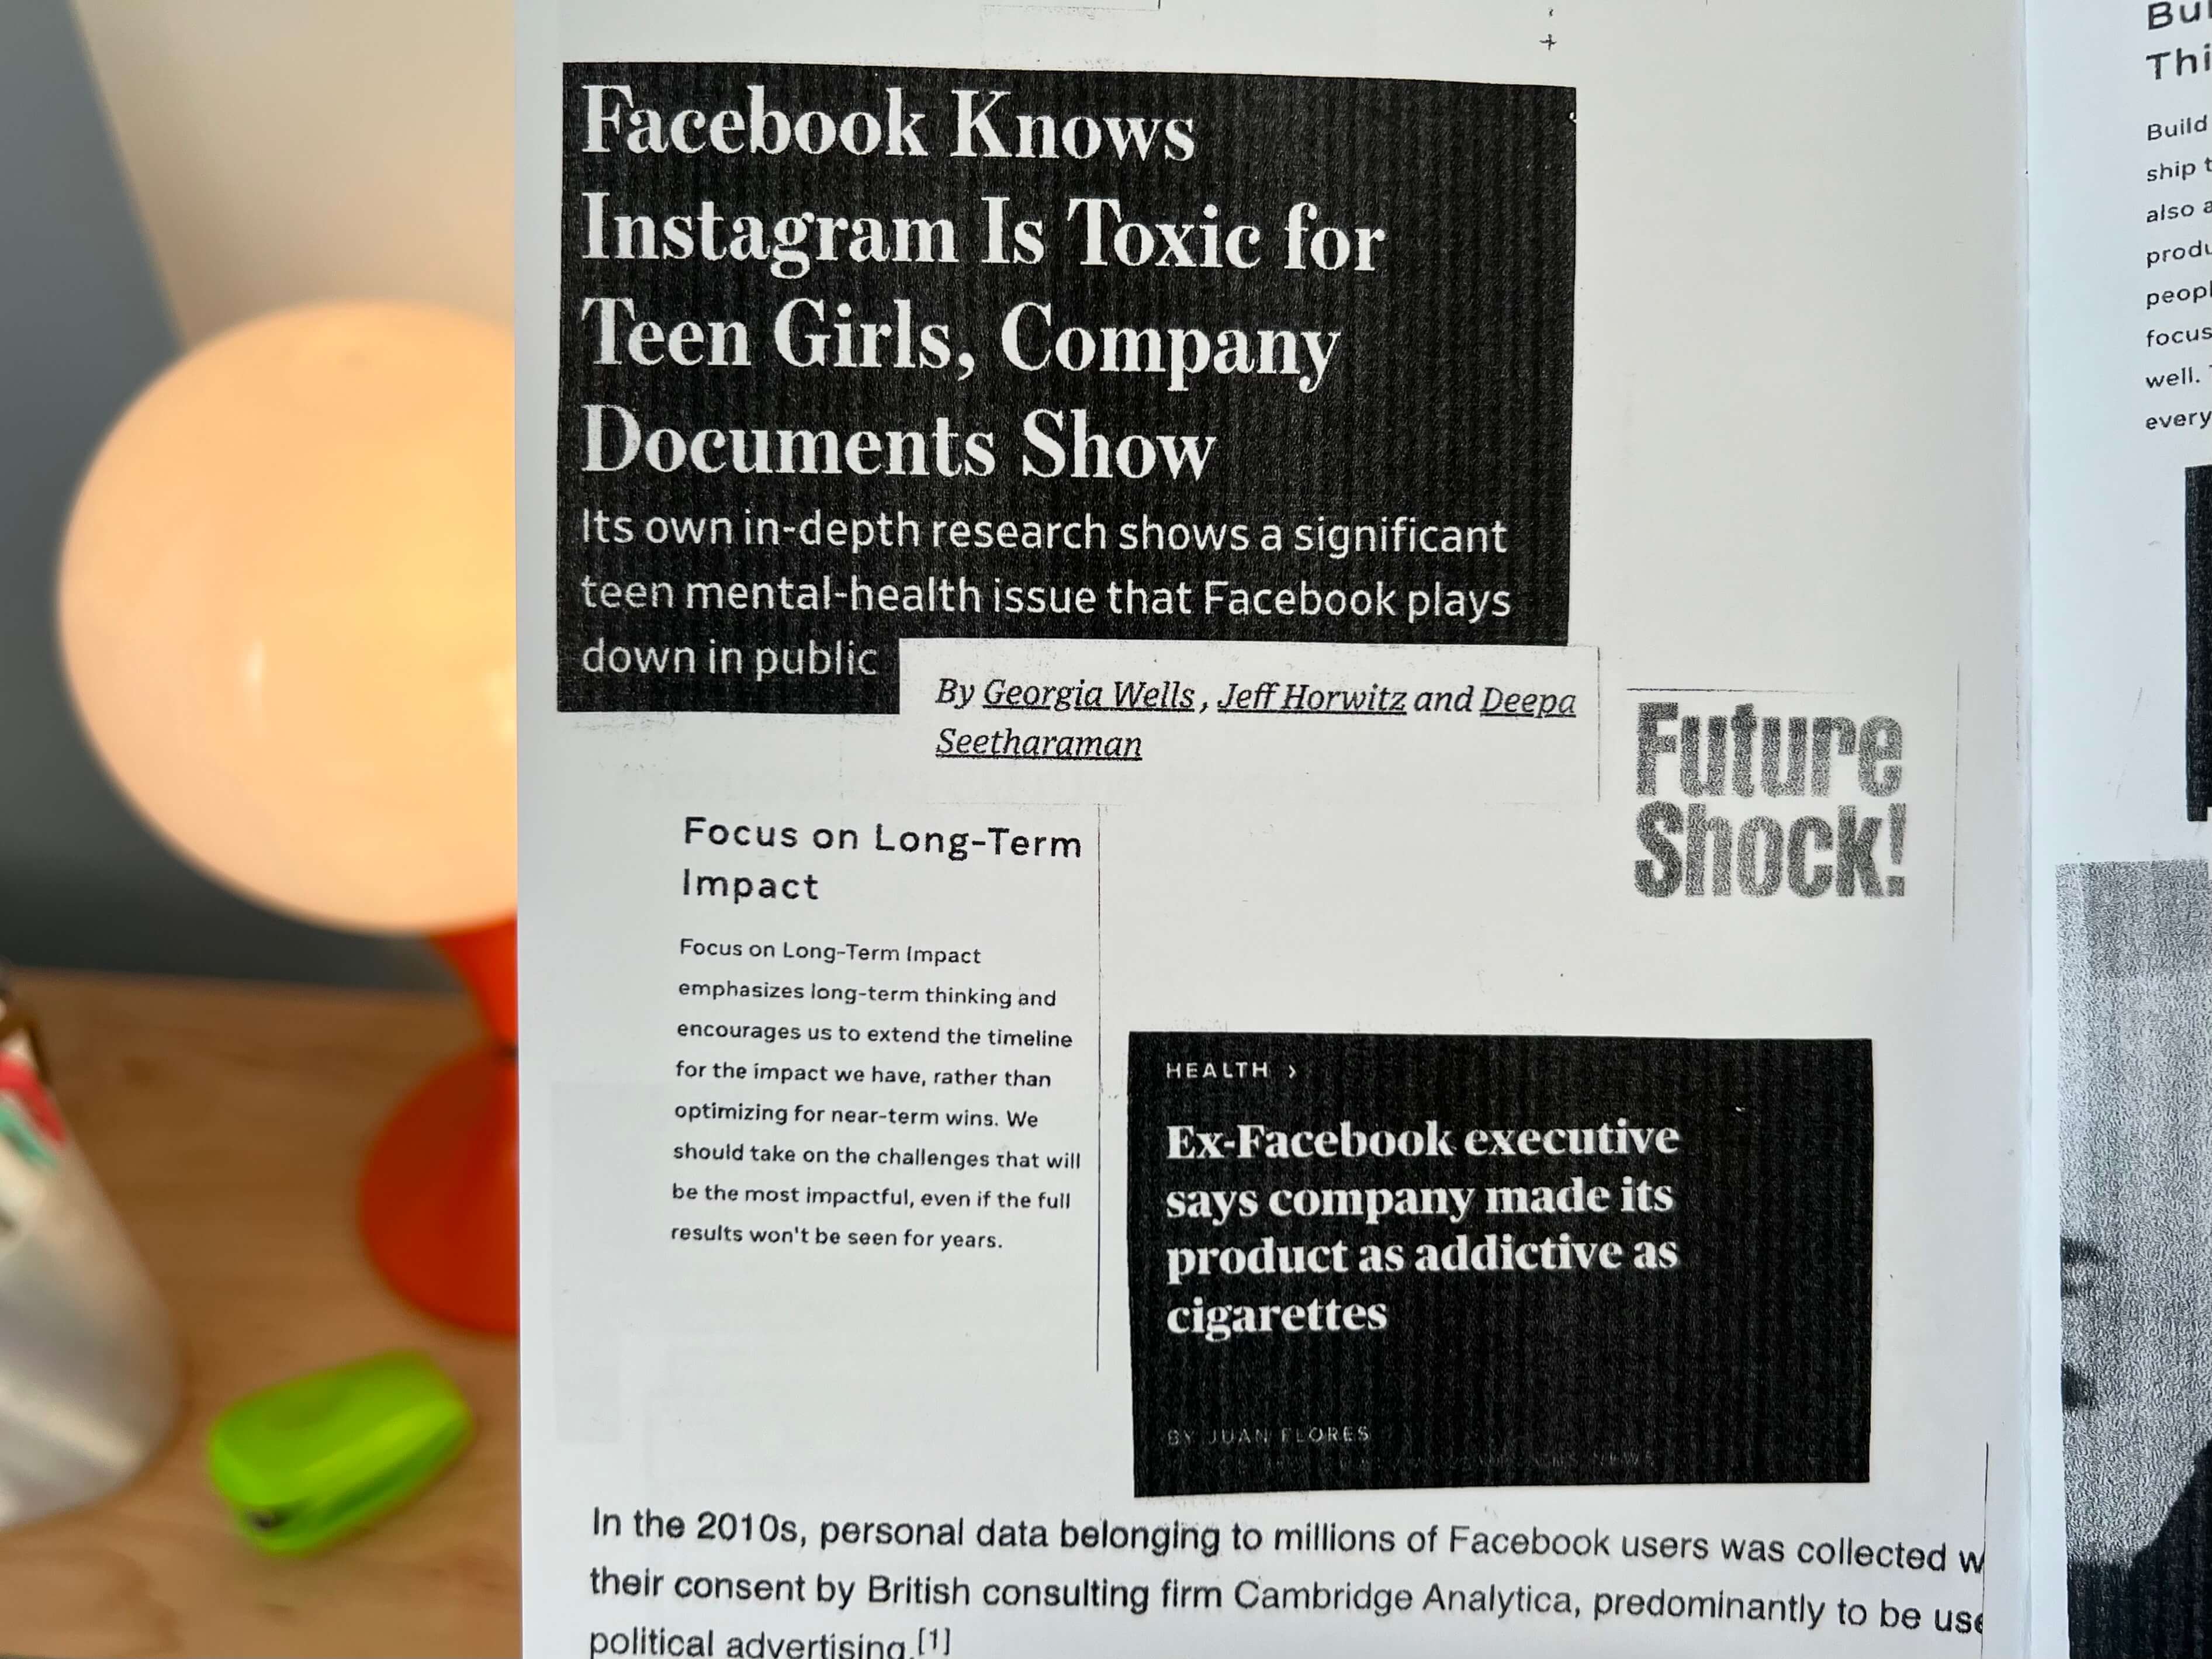 A spread in the zine about Facebook (now Meta) and its core values, like 'Focus On Long-Term Impact,' and news article headlines about Facebook, such as 'Facebook Knows Instagram is Toxic To Teen Girls, Company Documents Show.'